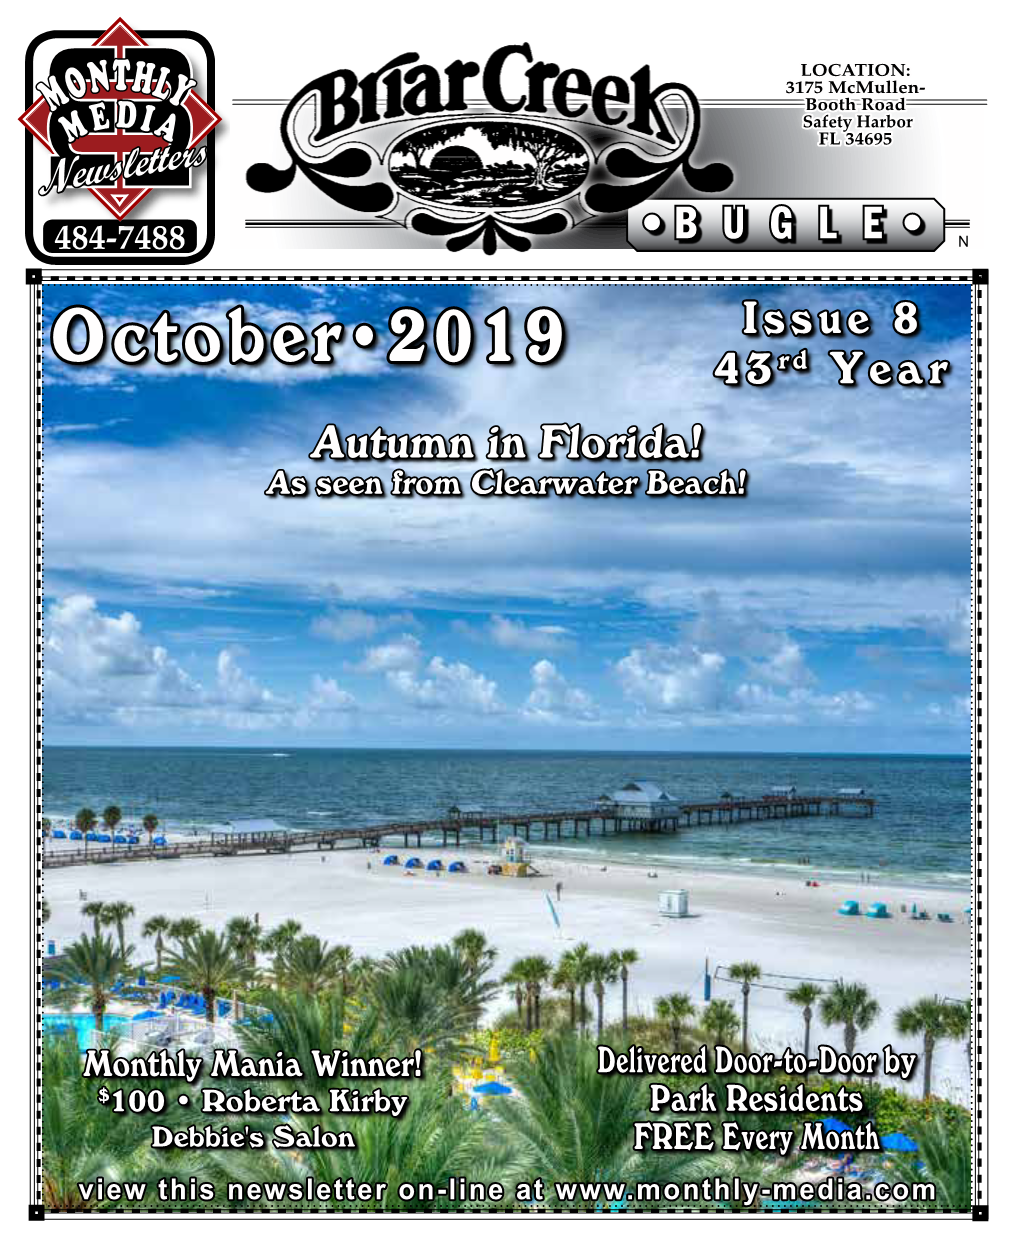 Octoberï2019 43Rd Year Autumn in Florida! As Seen from Clearwater Beach!